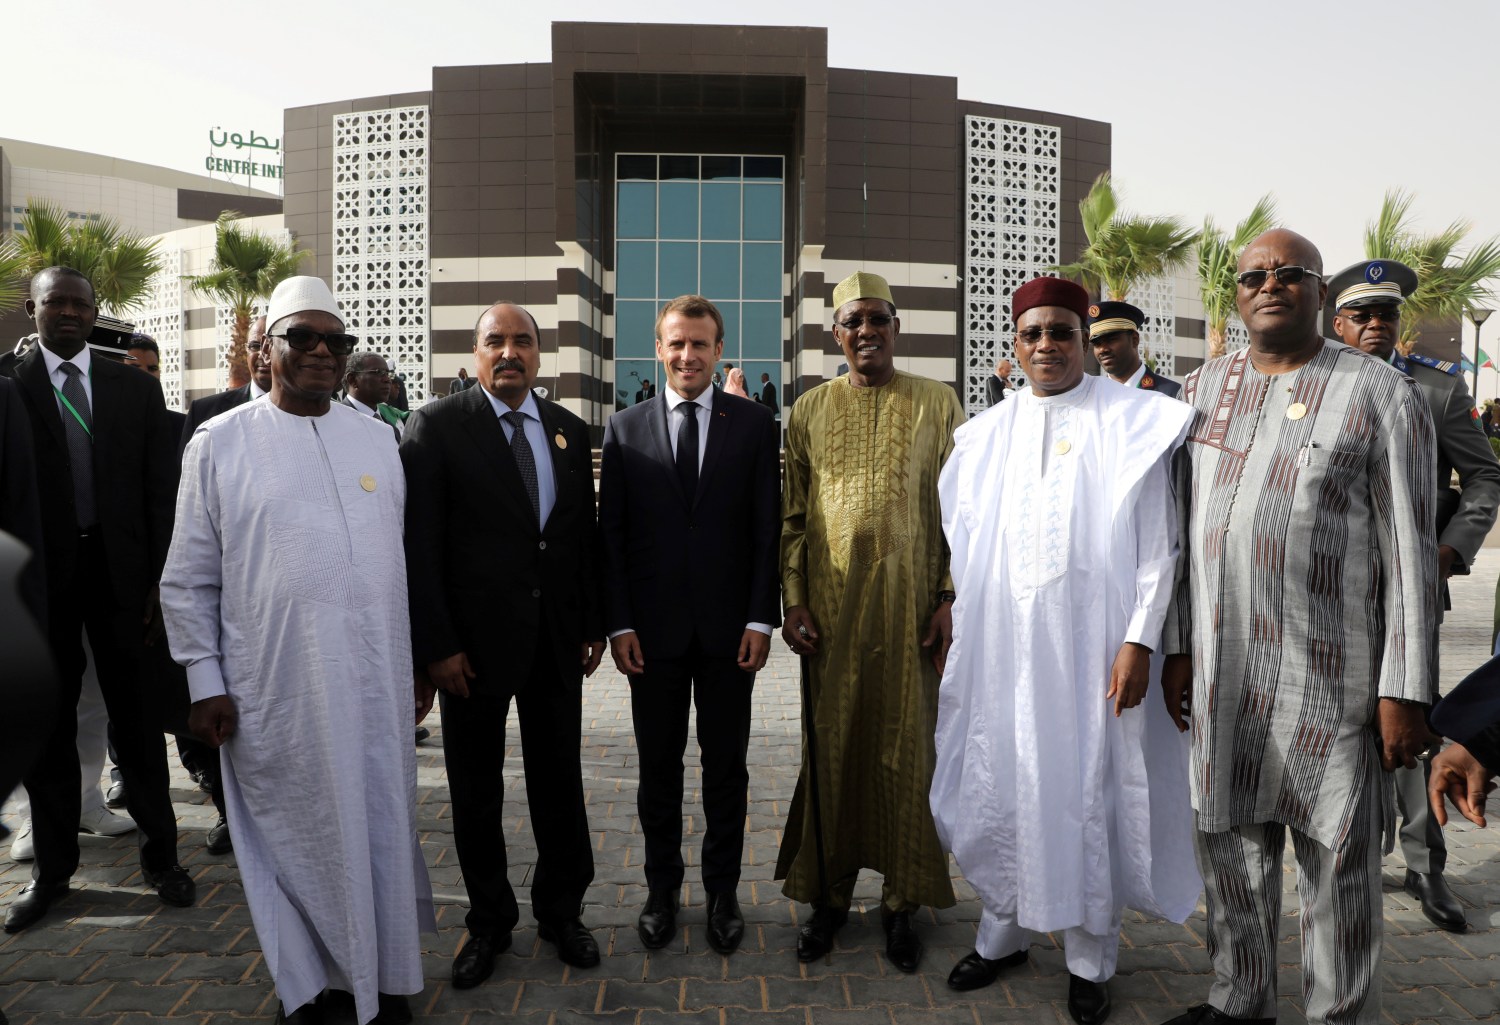 (From L) Mali's President Ibrahim Boubacar Keita, Mauritania President Mohamed Ould Abdel Aziz, French President Emmanuel Macron, Chad's President Idriss Deby, Niger's President Mahamadou Issoufou and Burkina Faso's President Roch Marc Christian Kabore pose as they leave the African Union summit to go to a meeting of the G5 Sahel "College de defense du G5 Sahel" CDS meeting in Nouakchott, Mauritania, July 2, 2018. Macron, making an exceptional appearance at an African Union (AU) summit, was expected to discuss hurdles facing a five-nation French-backed anti-terror unit, the "G5 Sahel" force.  Ludovic Marin/Pool via Reuters? - RC1B3C750F50